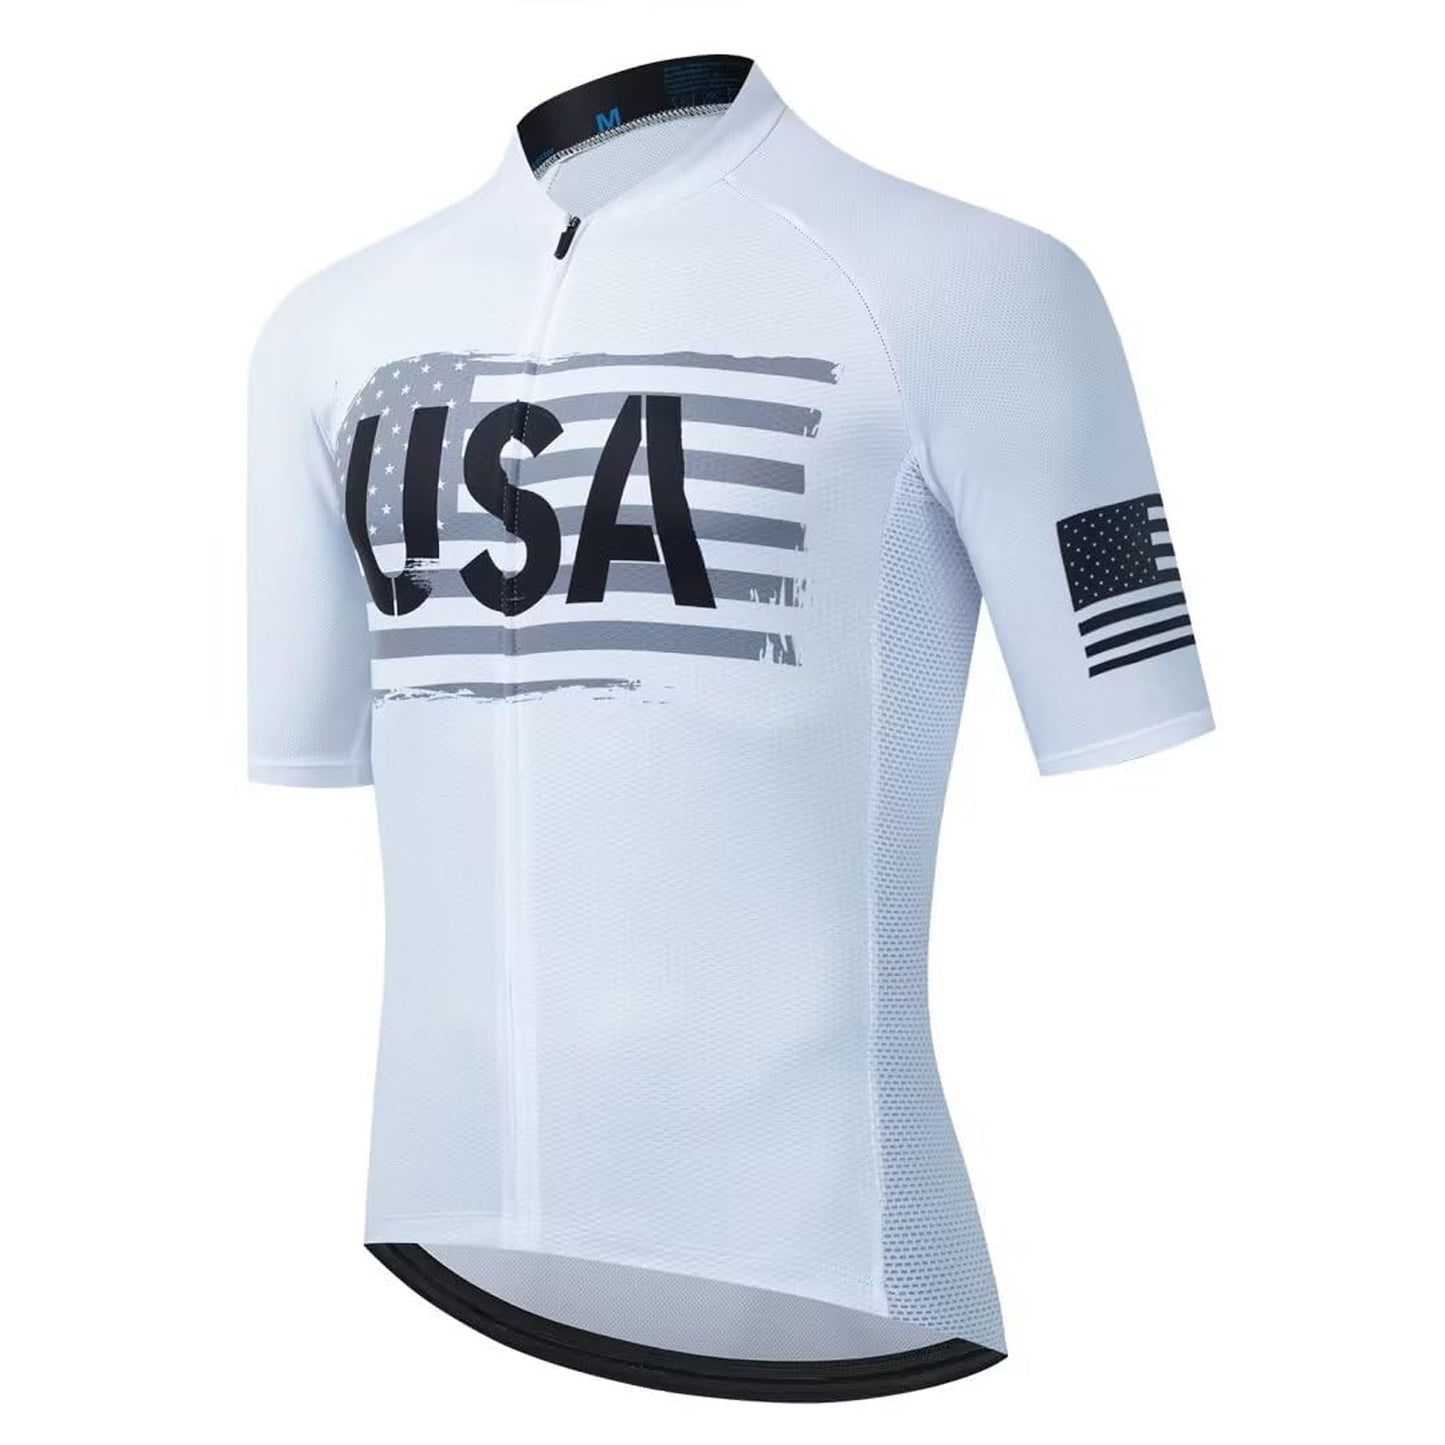 The USA Army MTB Short Sleeve Cycling Jersey Top